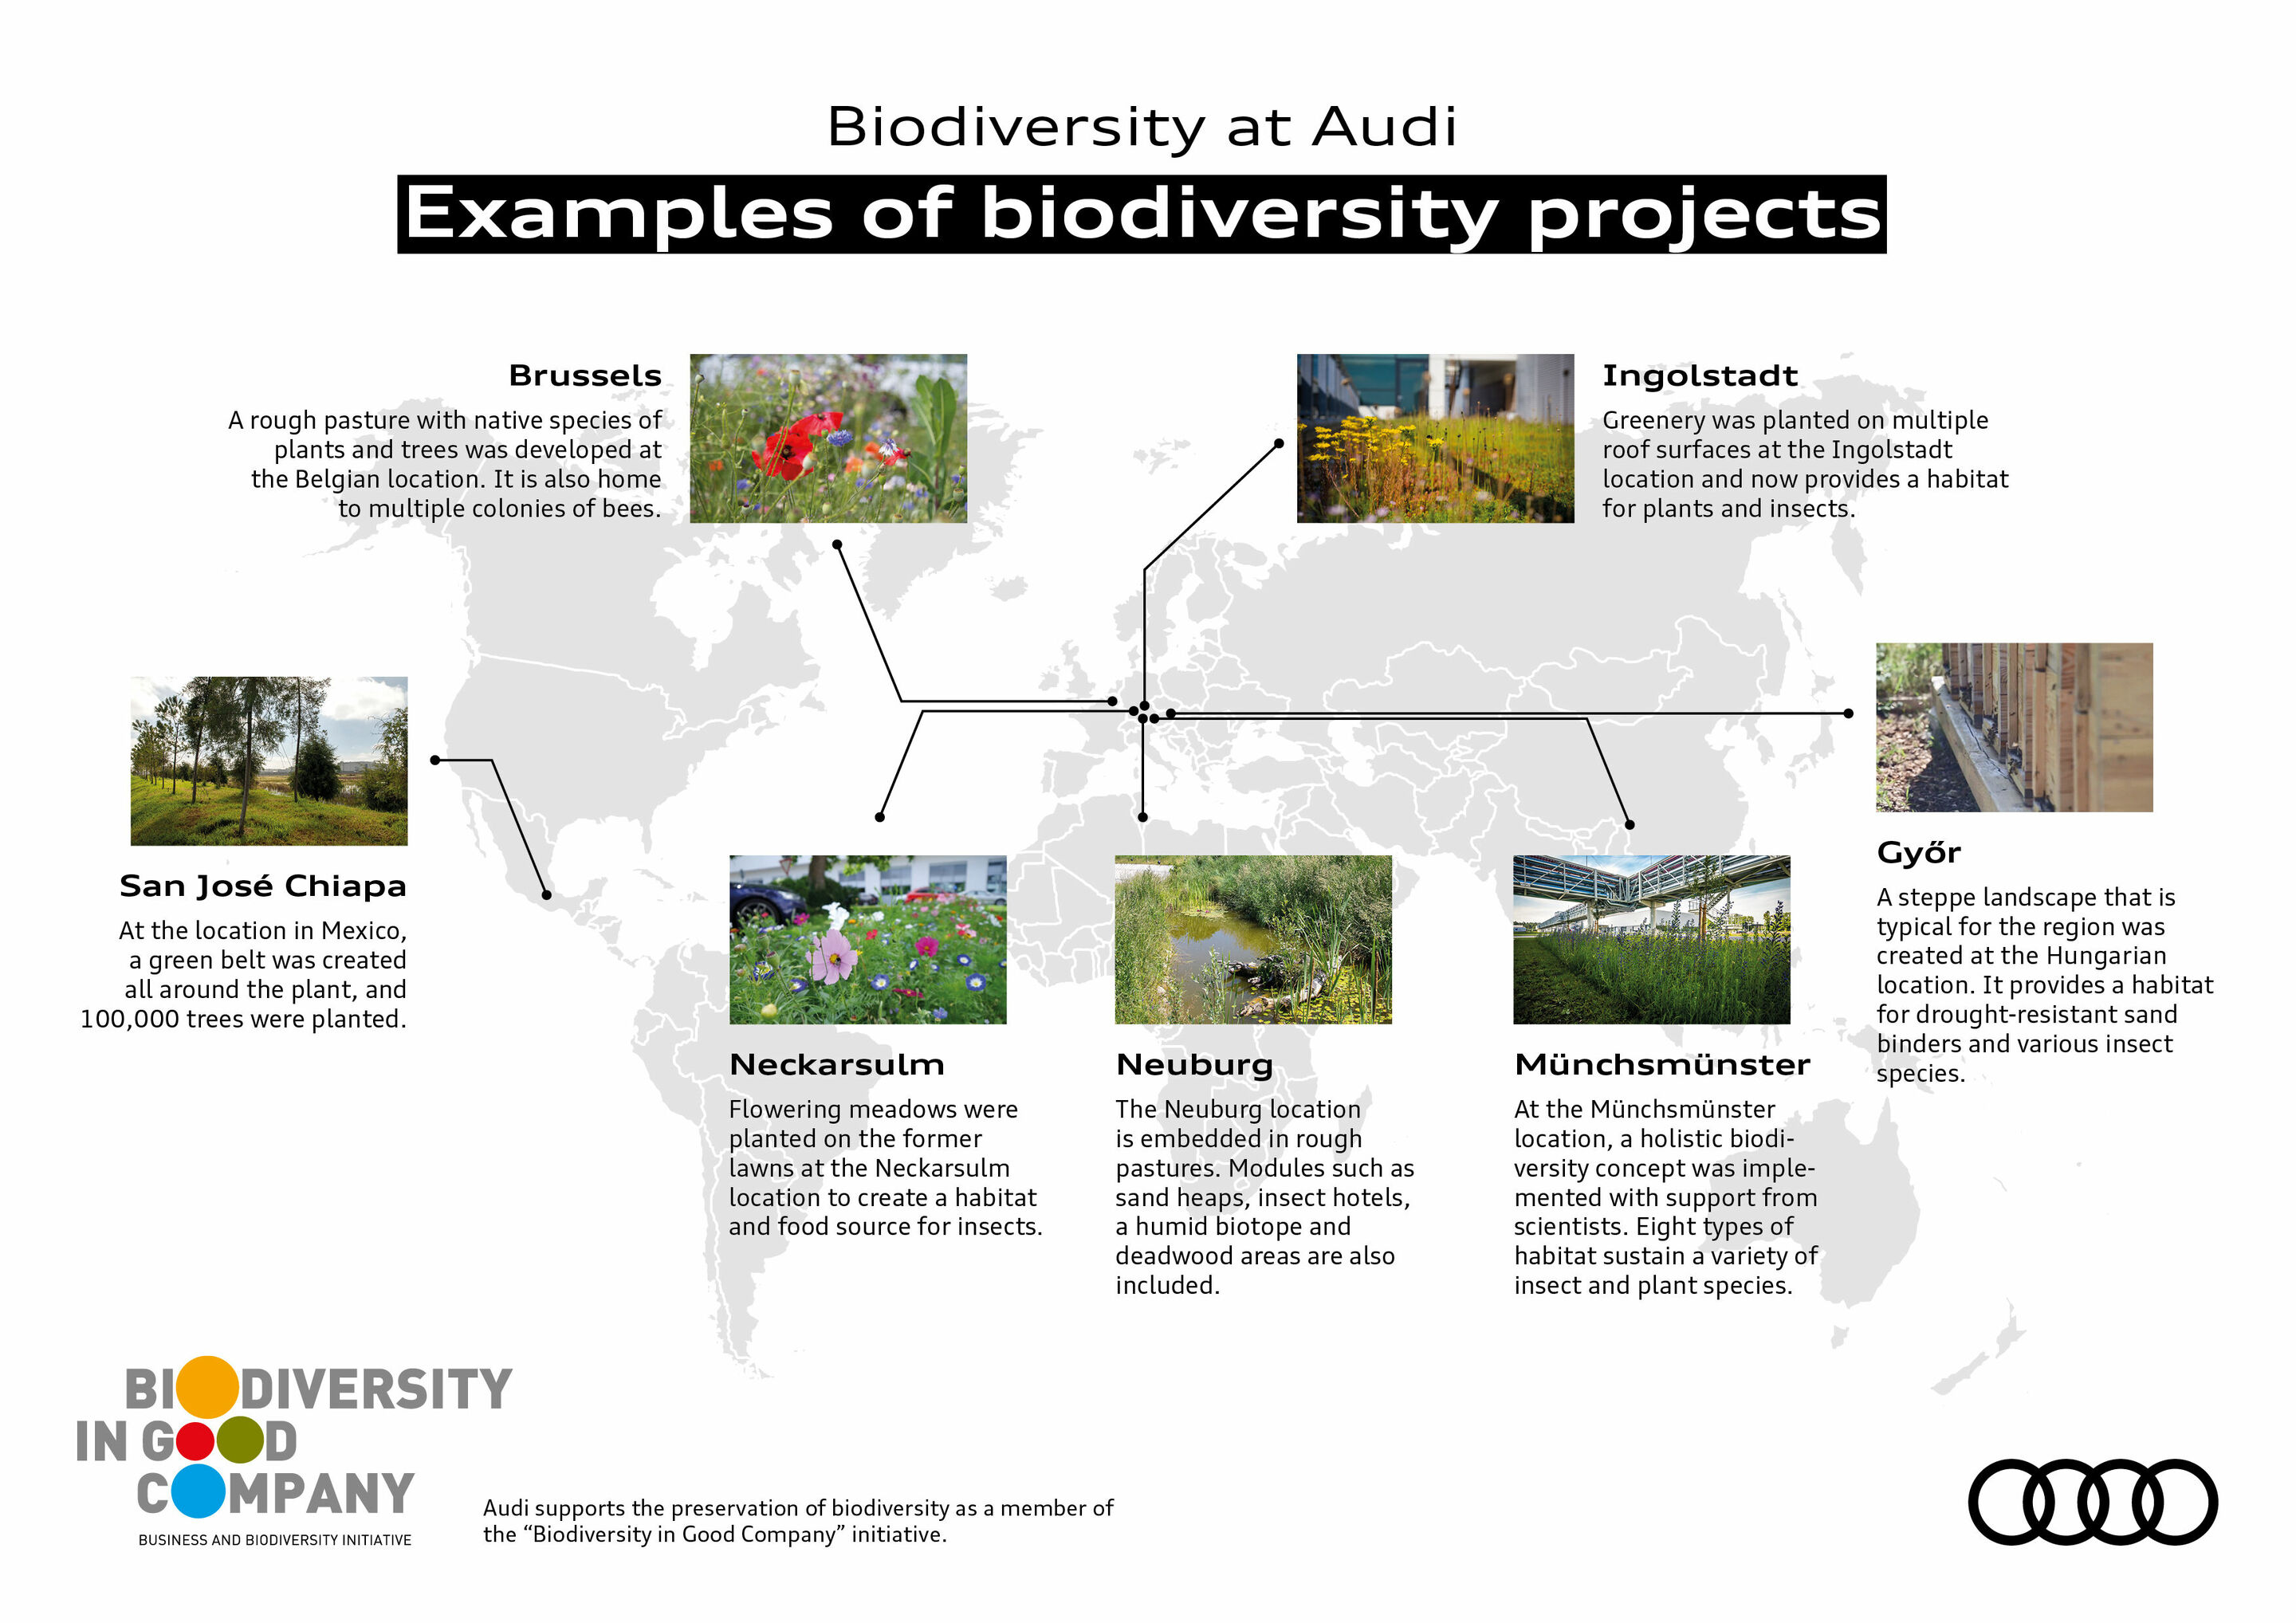 Audi creates near-natural habitat for animals and plants on 17 hectares of the plant site